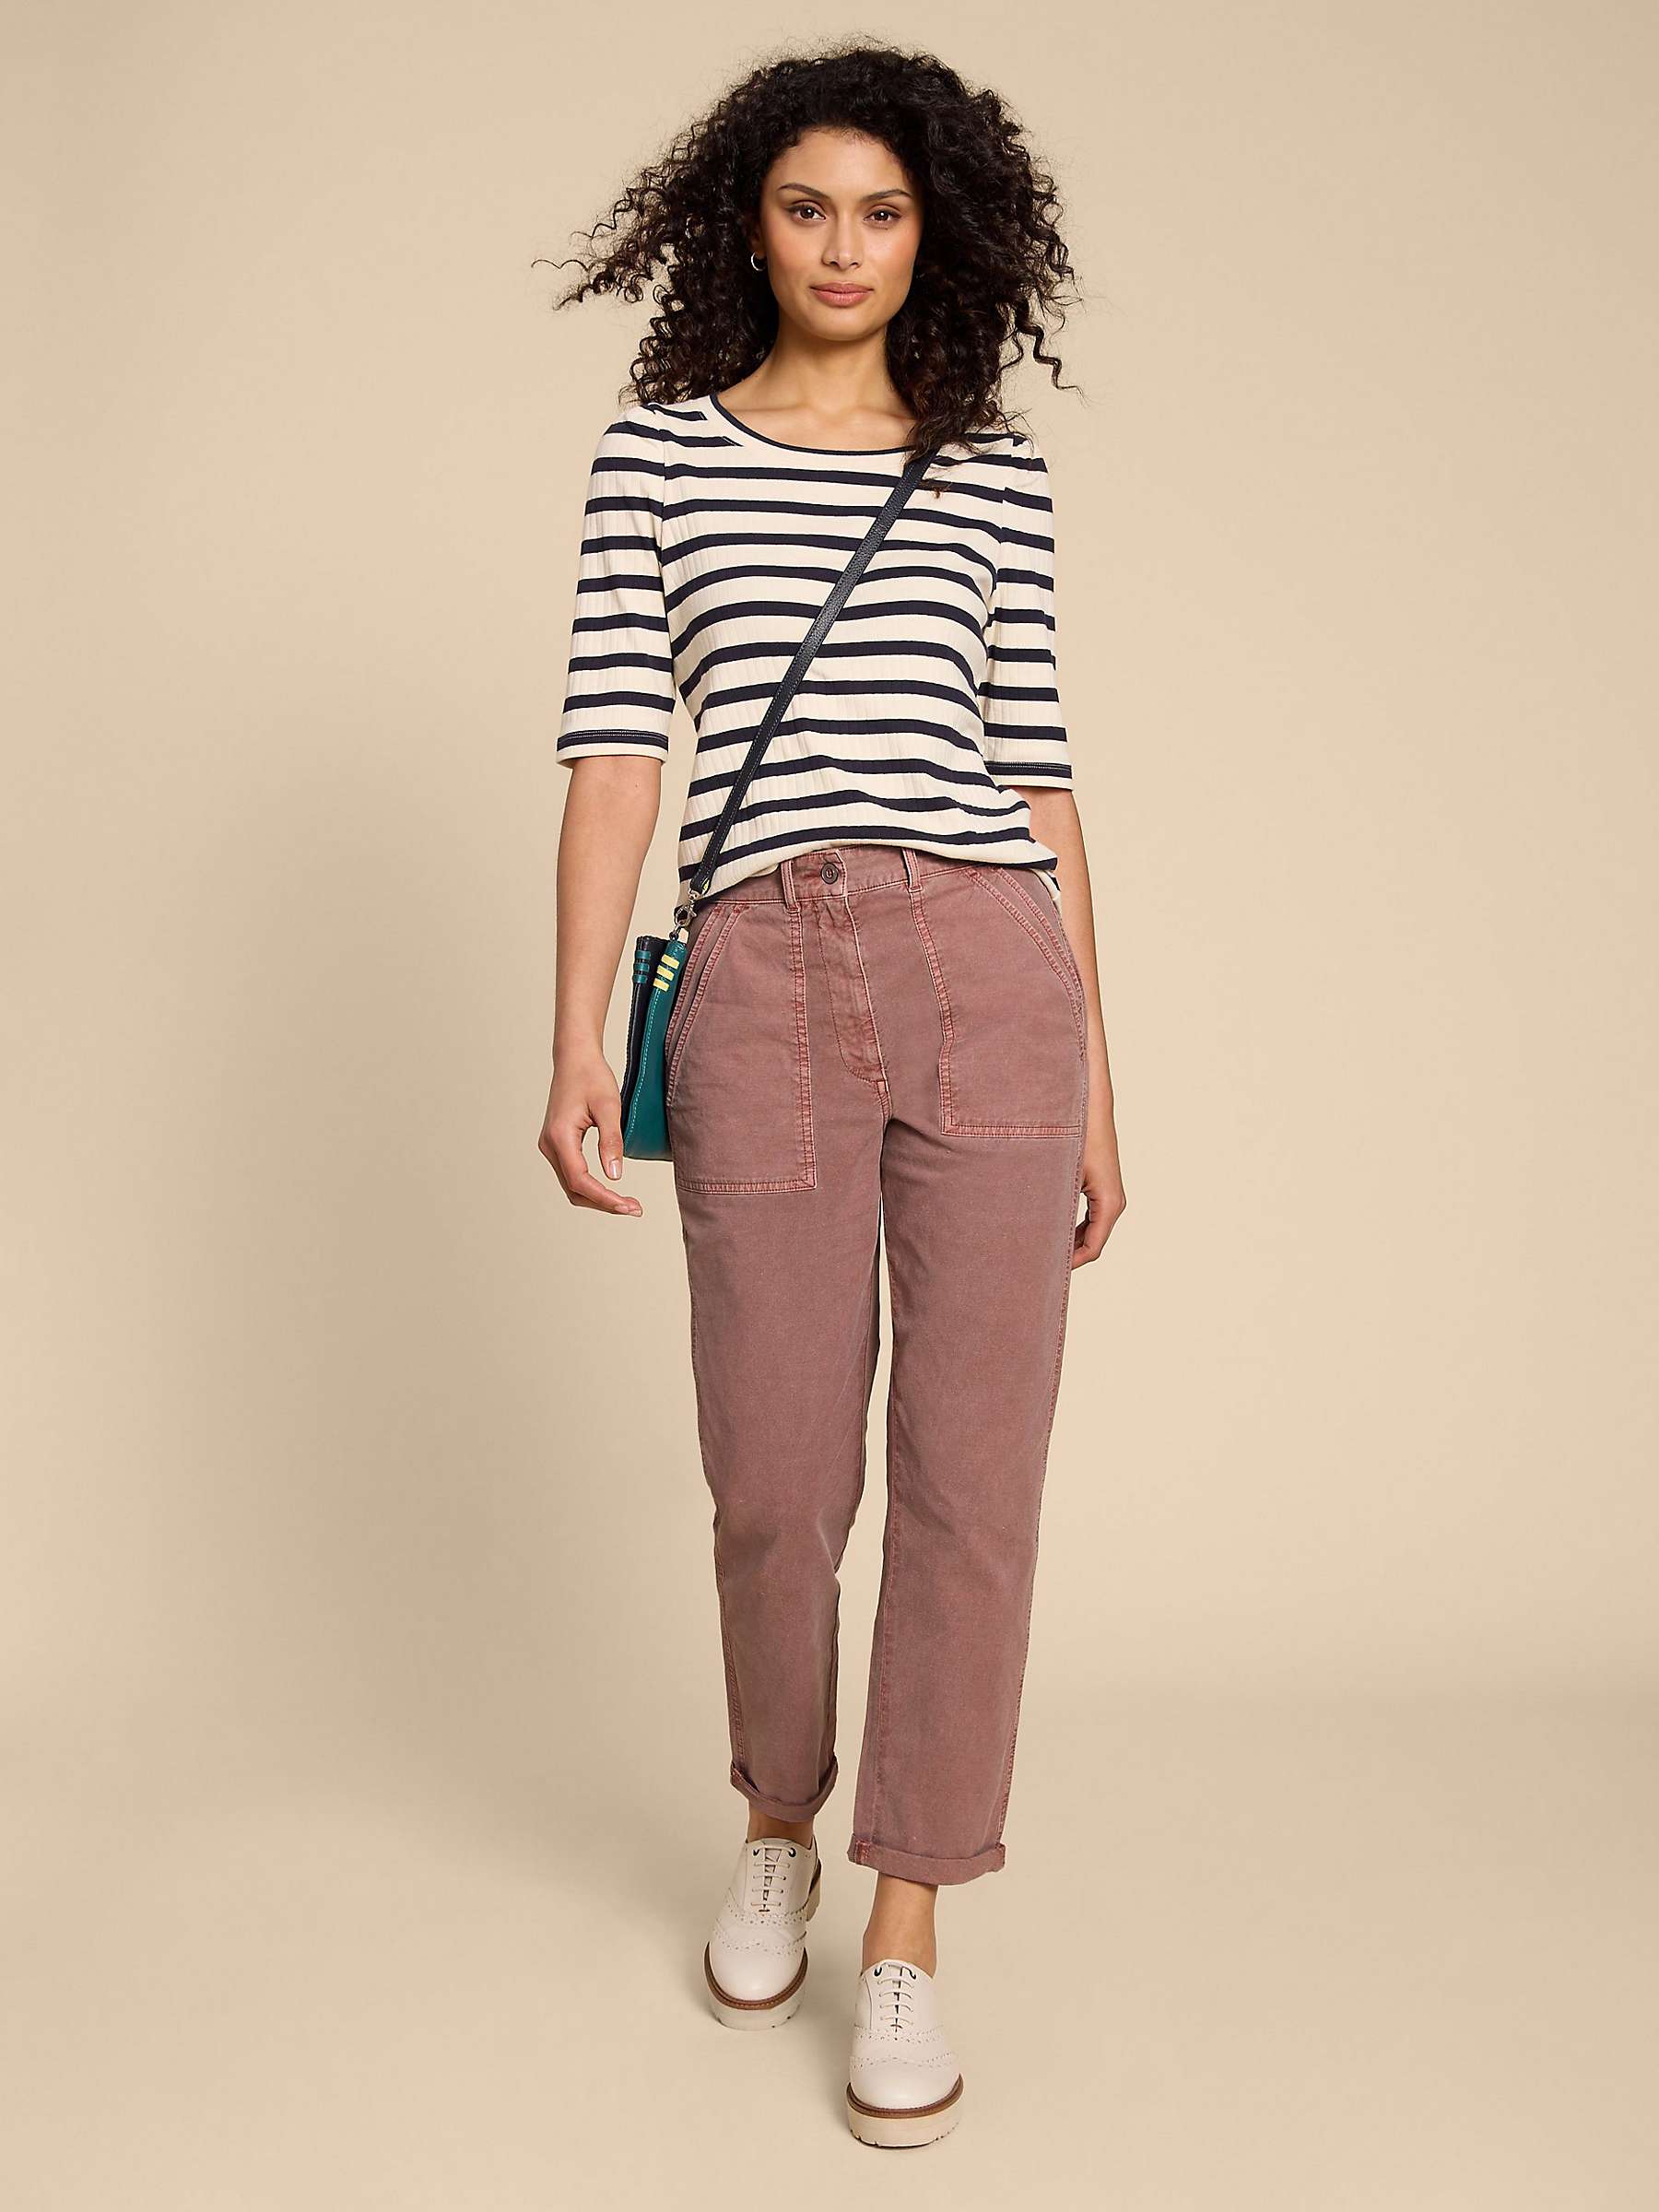 Buy White Stuff Petite Twister Chino Trousers Online at johnlewis.com